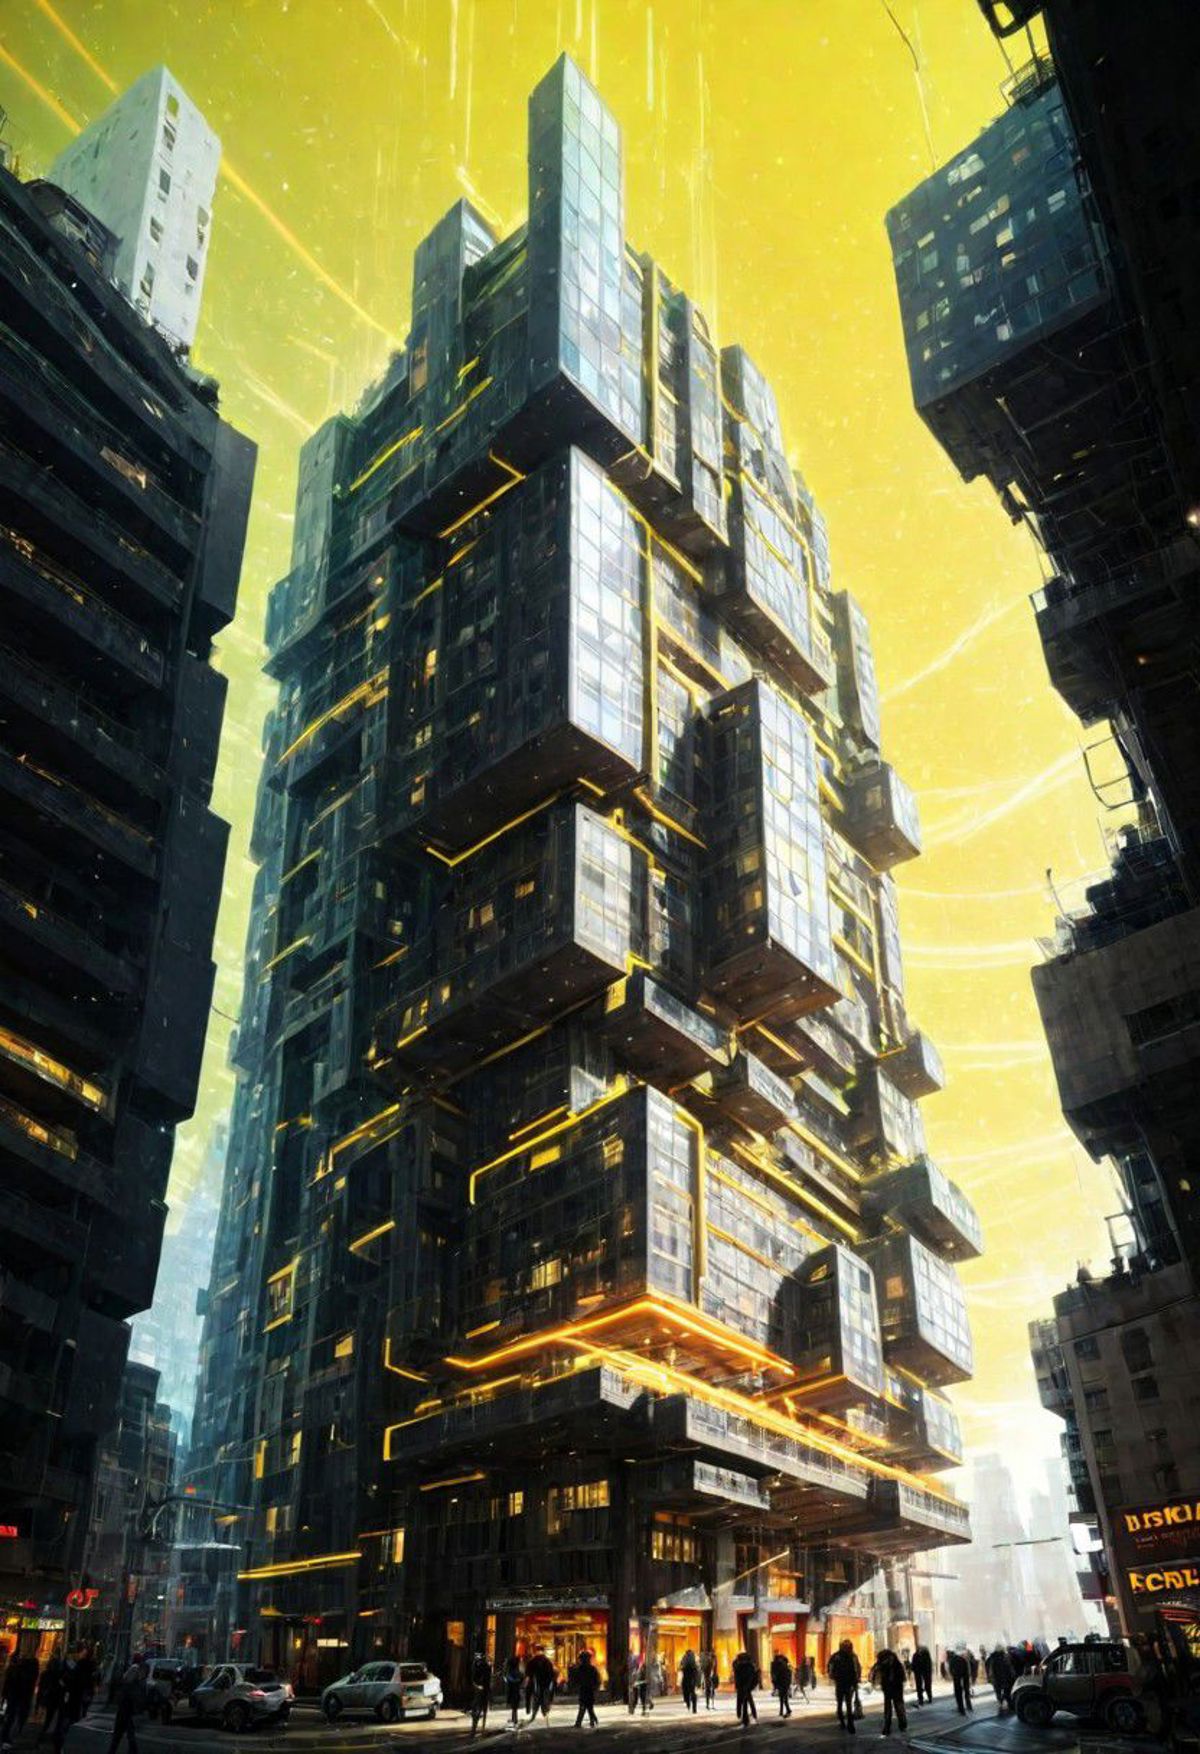 A tall, illuminated, glass-paneled building with a yellow tint on the bottom floors.